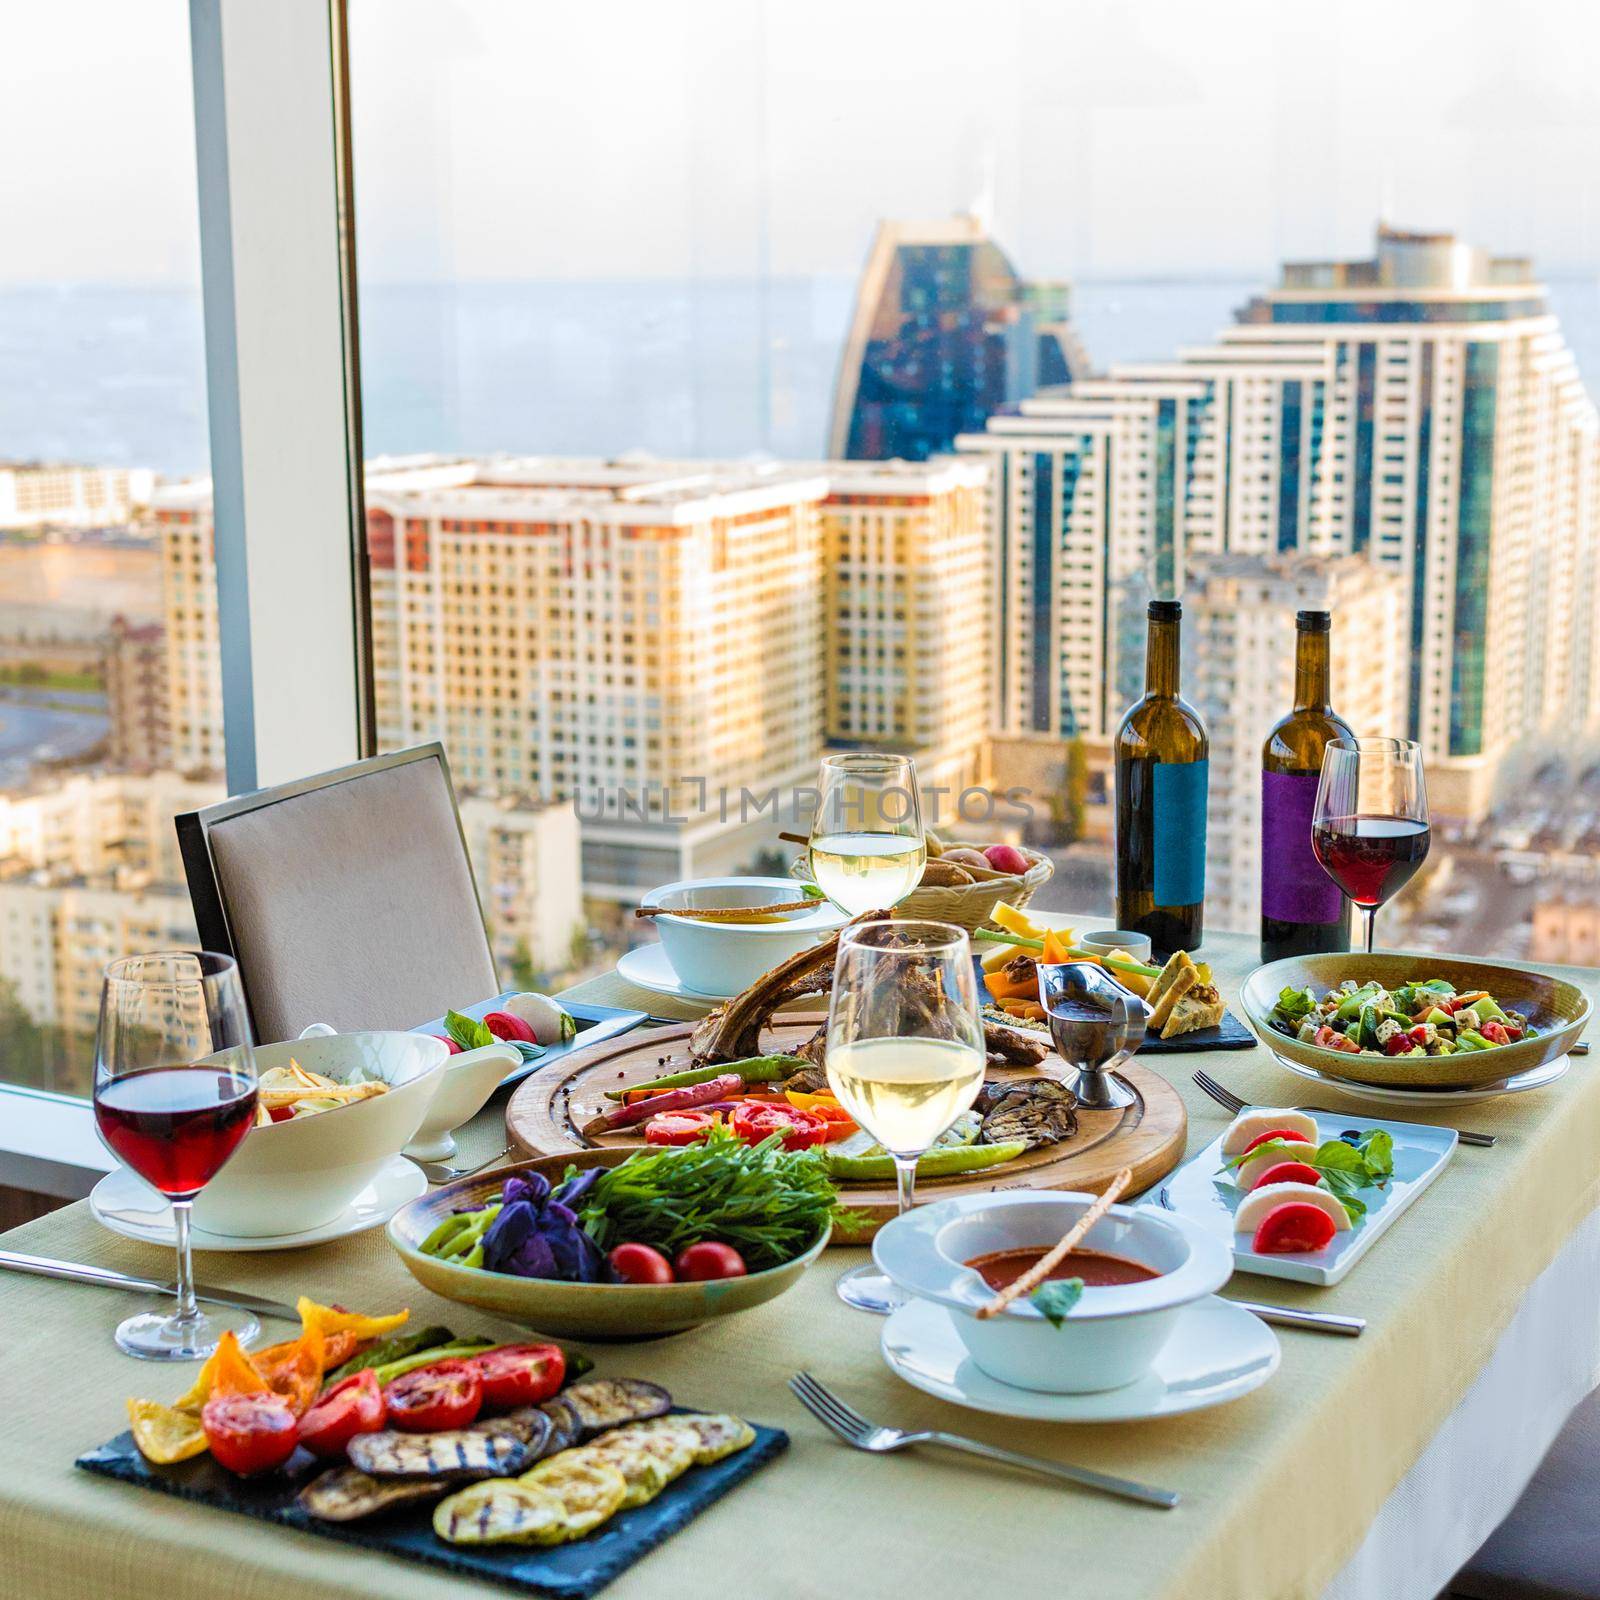 Beautiful meal on the table with city view by ferhad